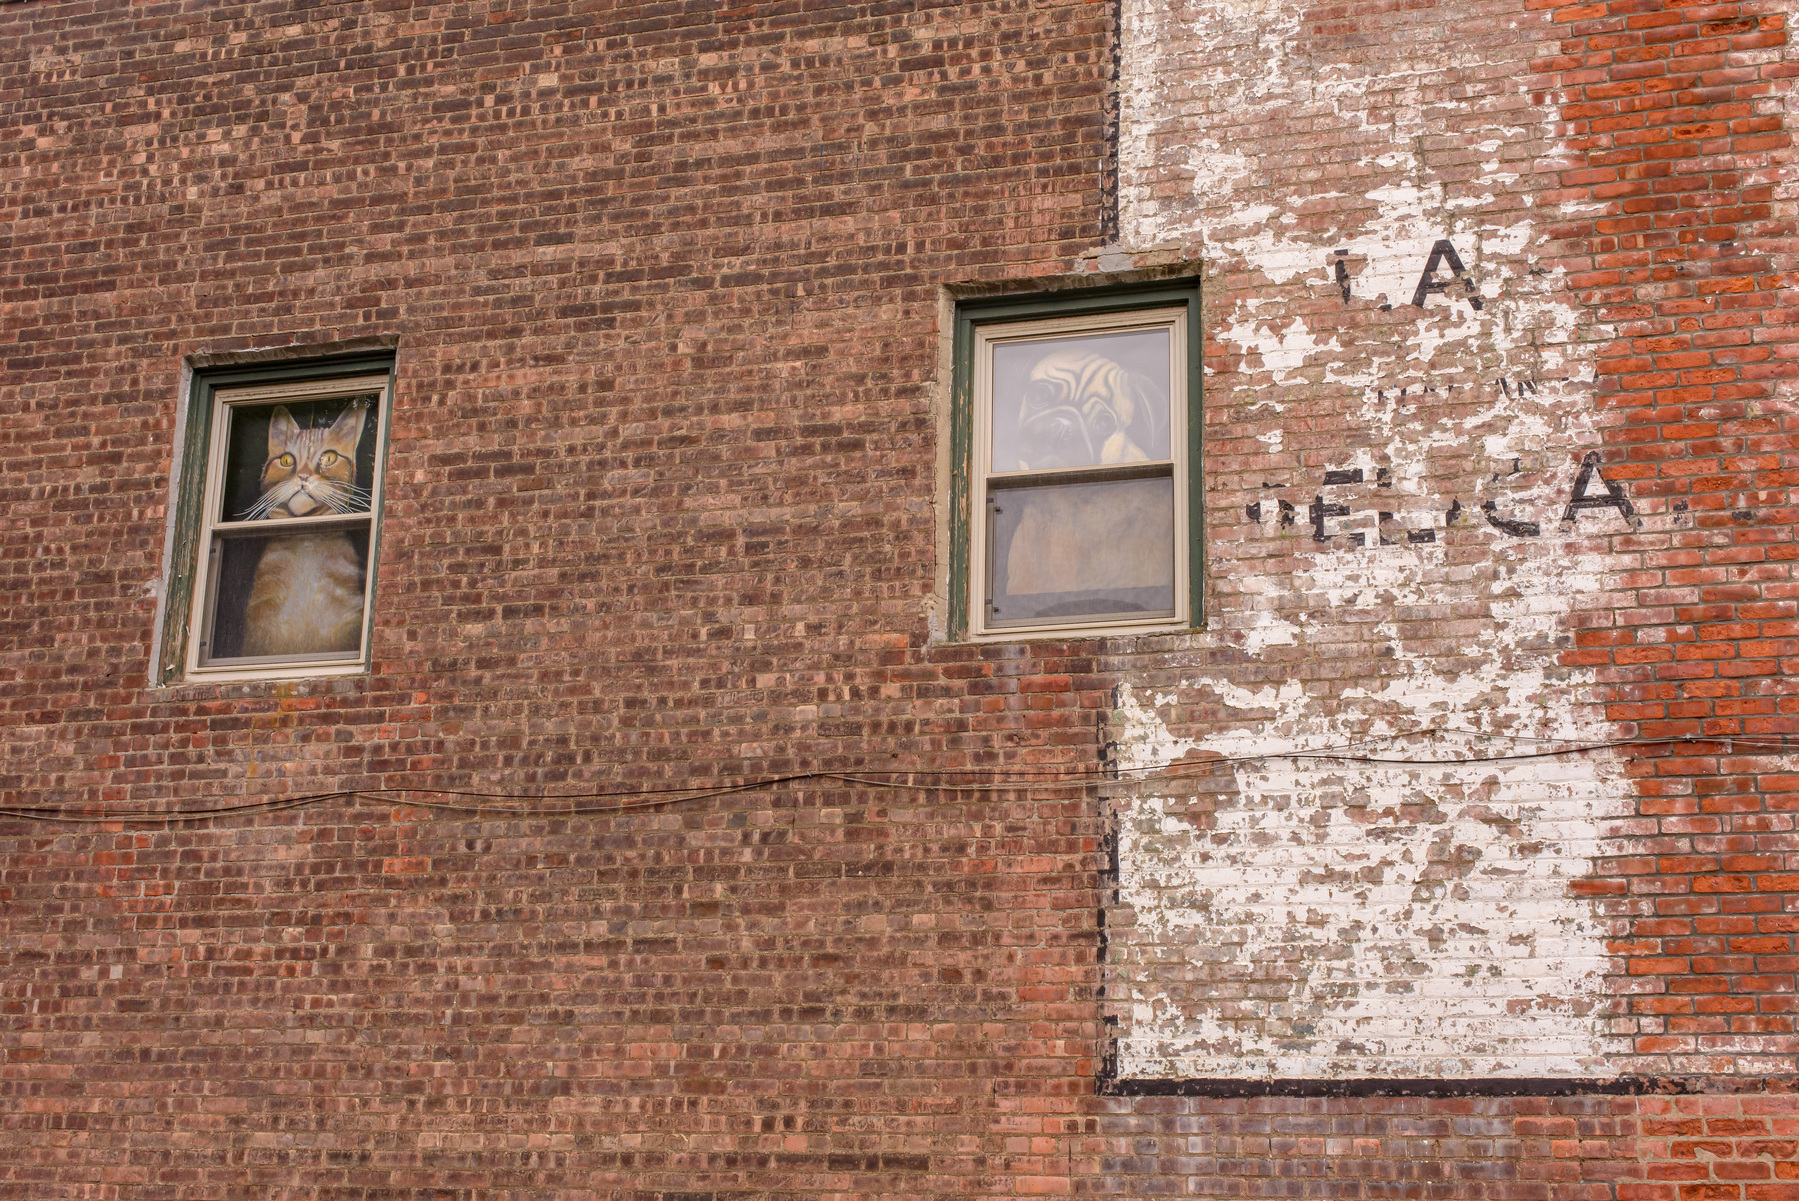 brick building wall with two windows, the one on the left with a cat photograph hung on the inside, the one on the right with a dog image hung on the inside and a faded painted sign running from top to bottom on the right third of the frame